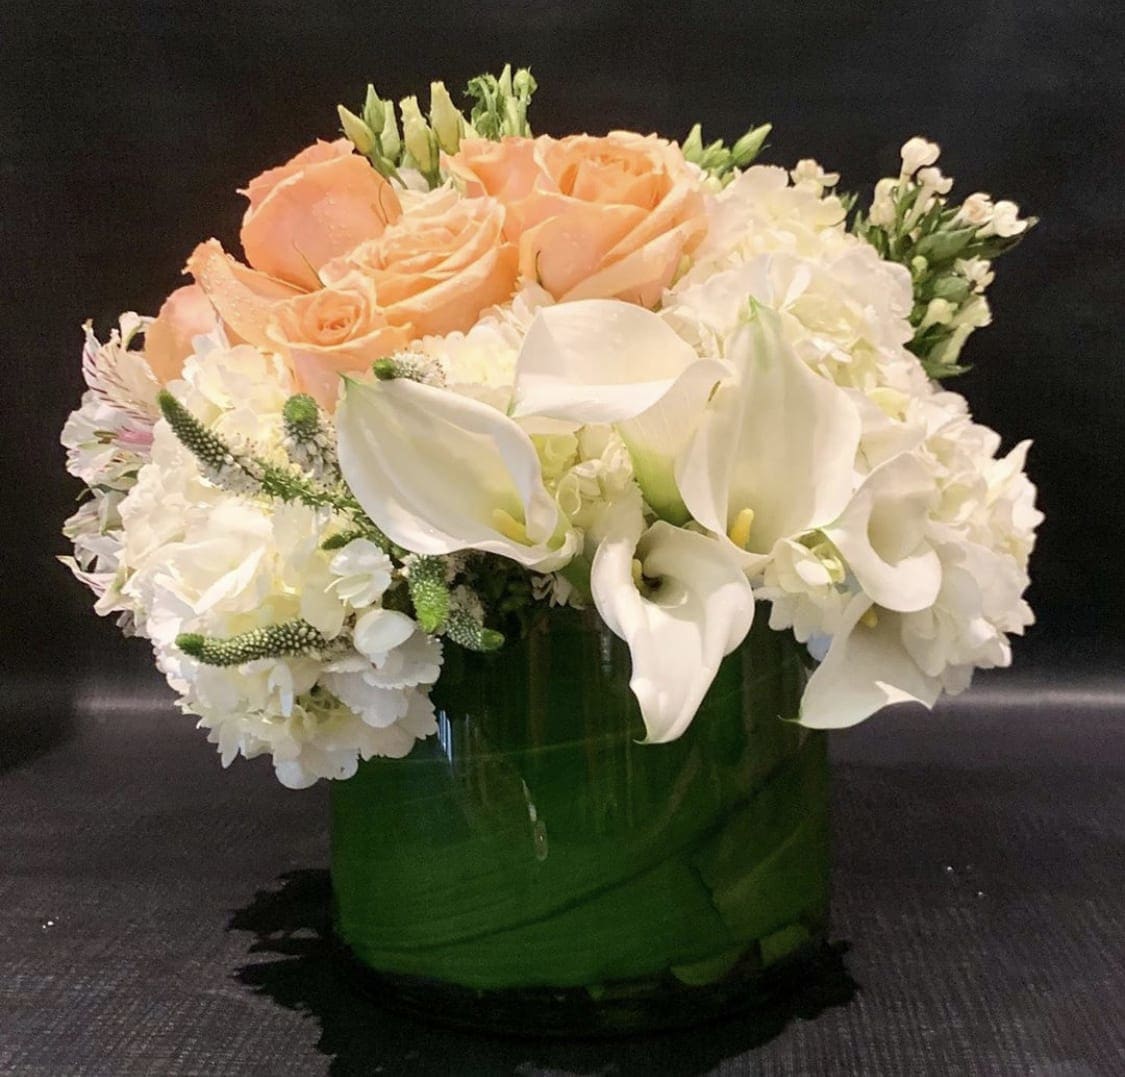 Custom Arrangement of white hydrangea white calla lilies, alstroemeria &amp; roses - Custom Arrangement of white hydrangea white calla lilies, alstroemeria, lisianthus, roses &amp; Bells of Ireland in clear glass cylinder with leaf wrap.